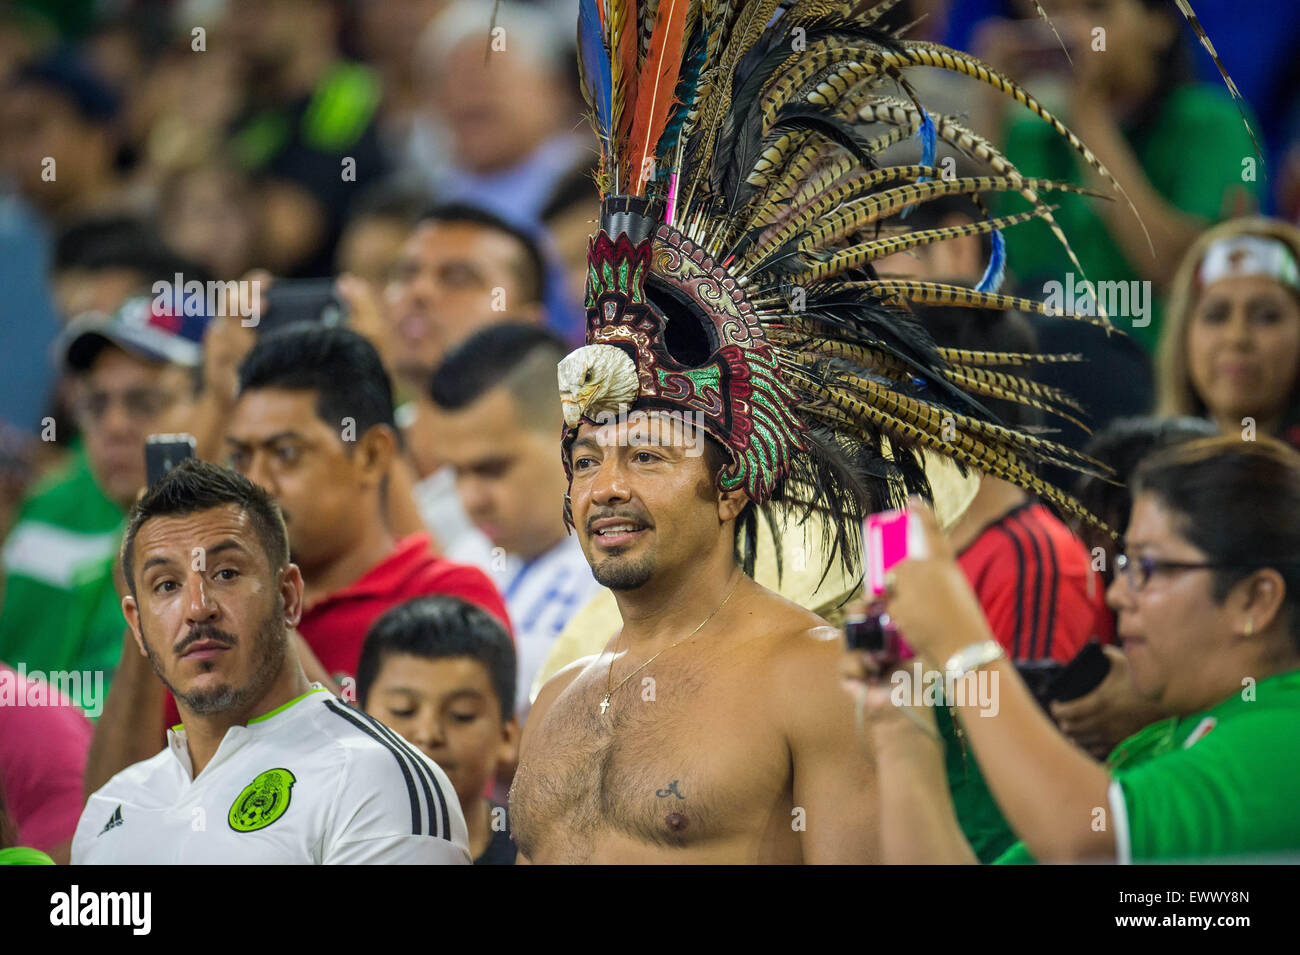 Houston, TX, USA. 1st July, 2015. Mexico fans prior to an international soccer match between Honduras and Mexico at NRG Stadium in Houston, TX. Trask Smith/CSM/Alamy Live News Stock Photo